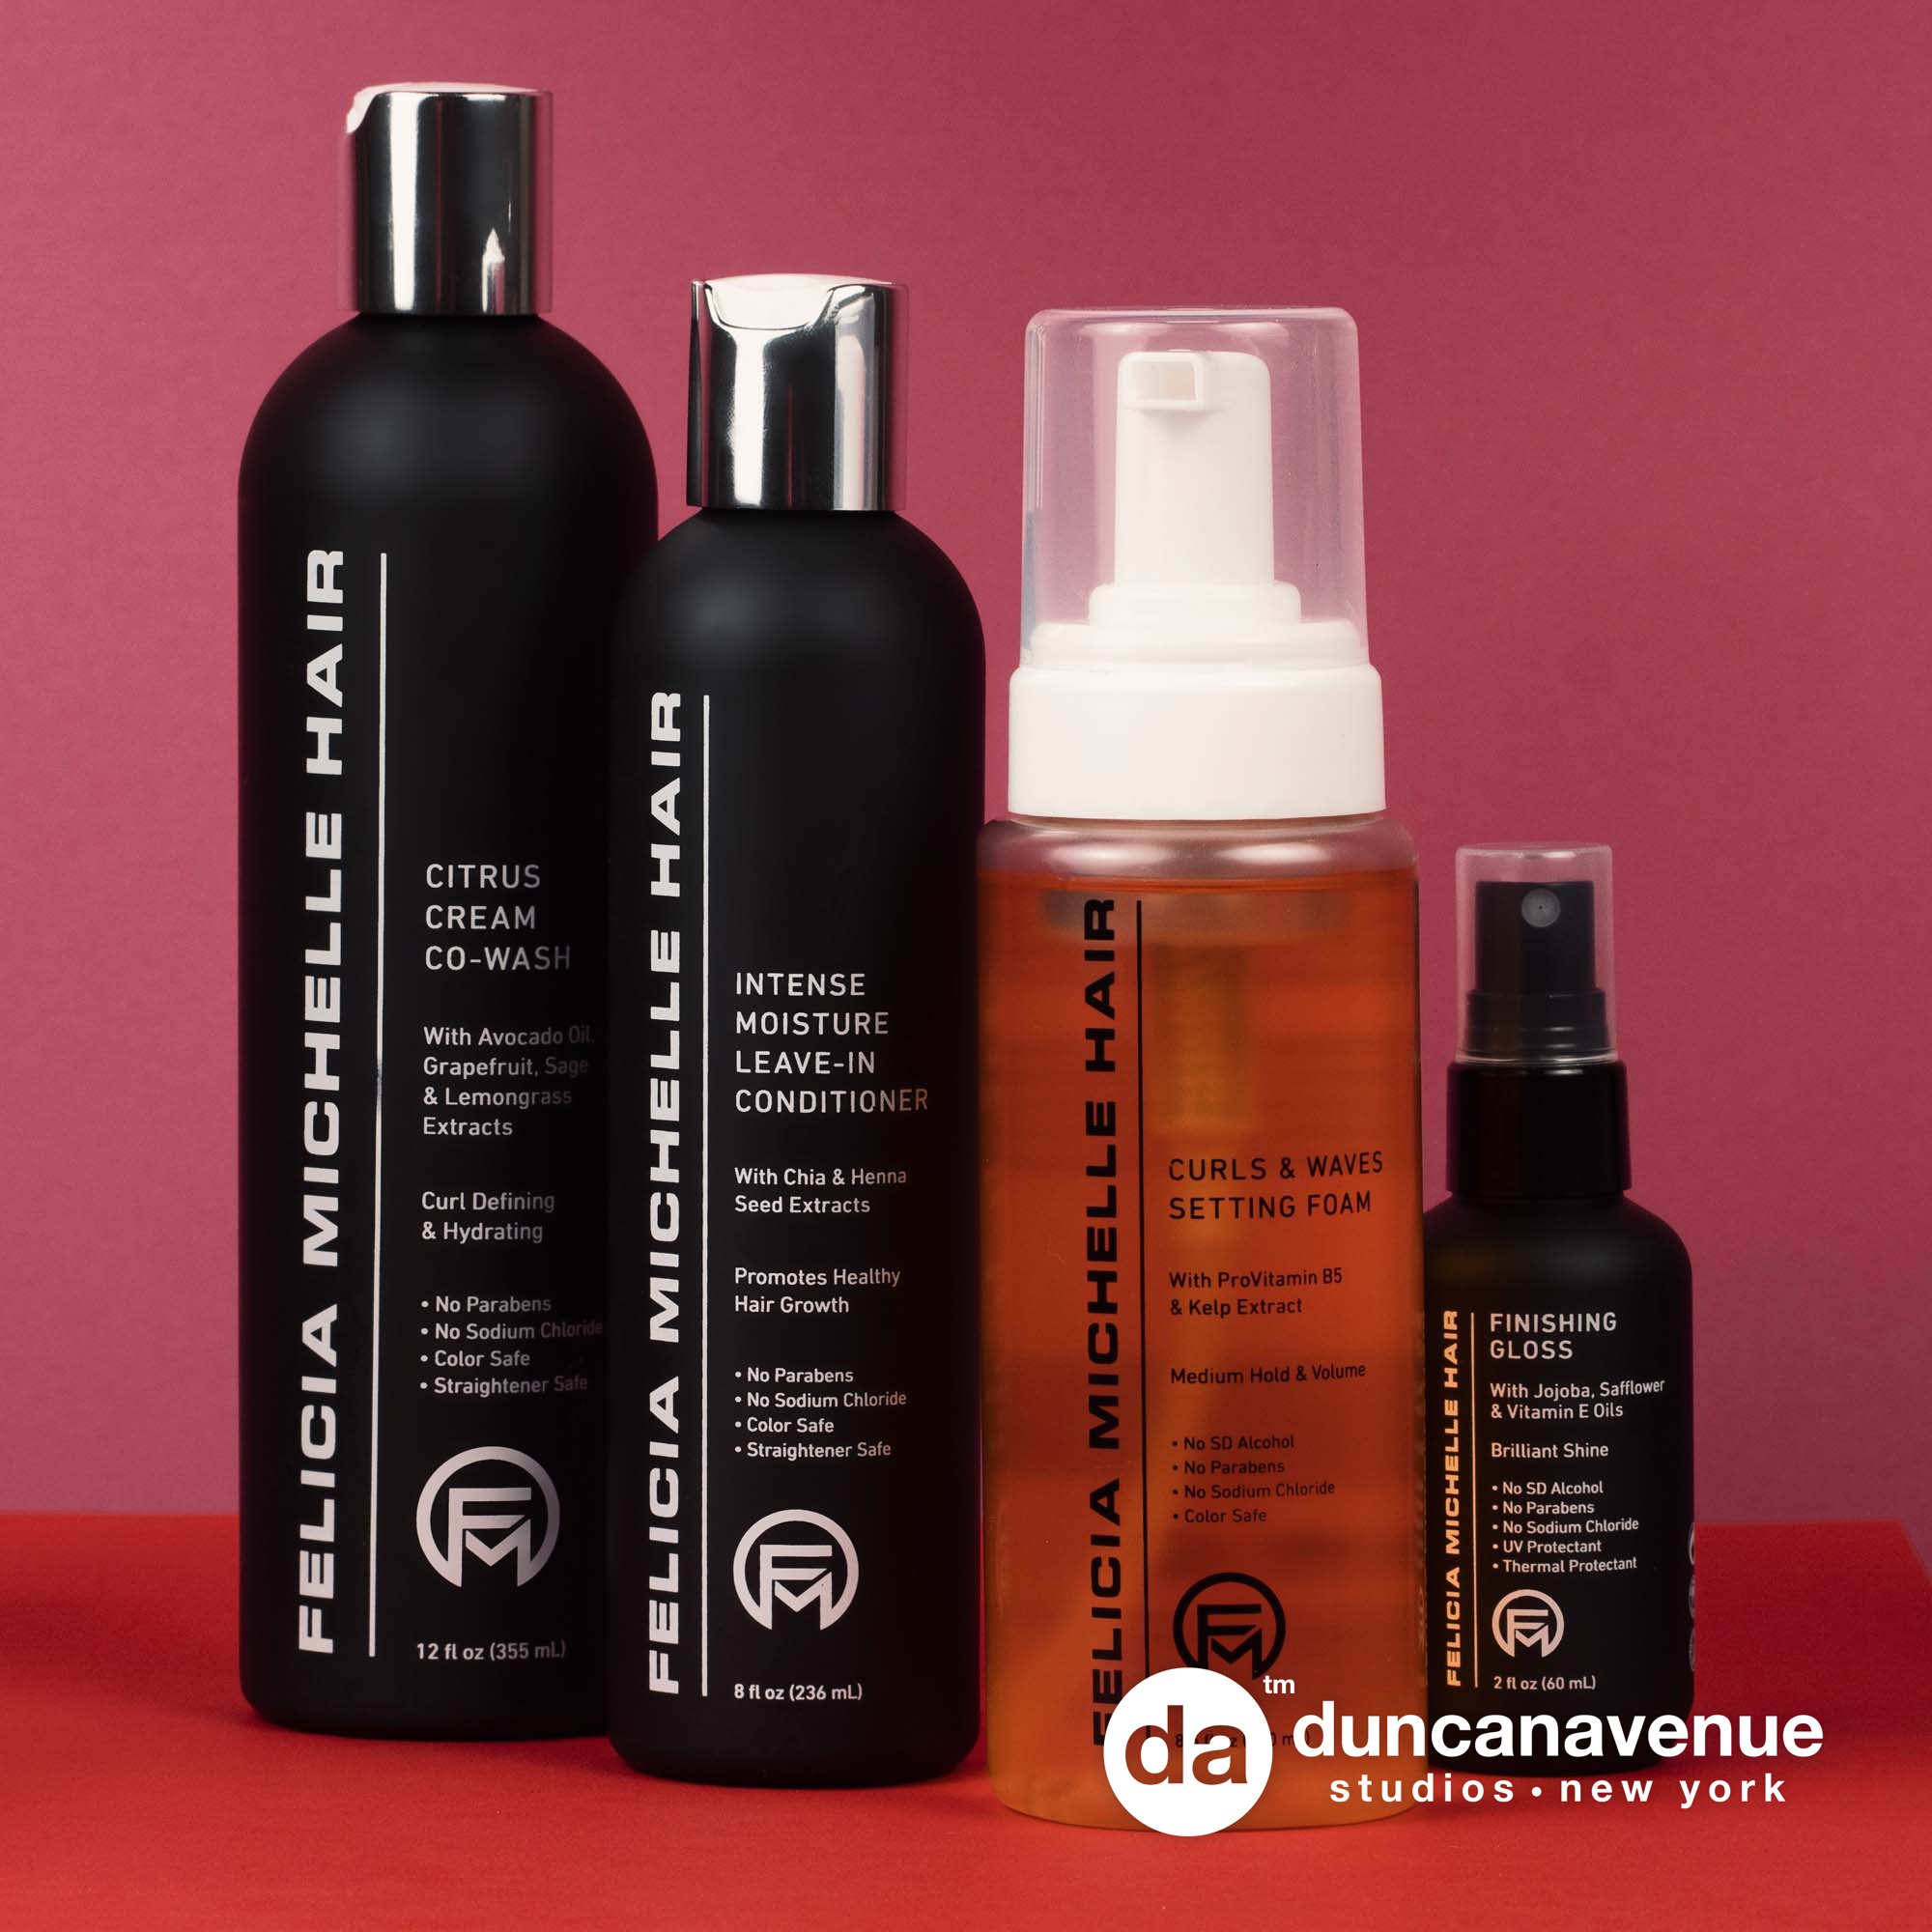 Felicia Michelle Hair – Product Photography by Maxwell Alexander